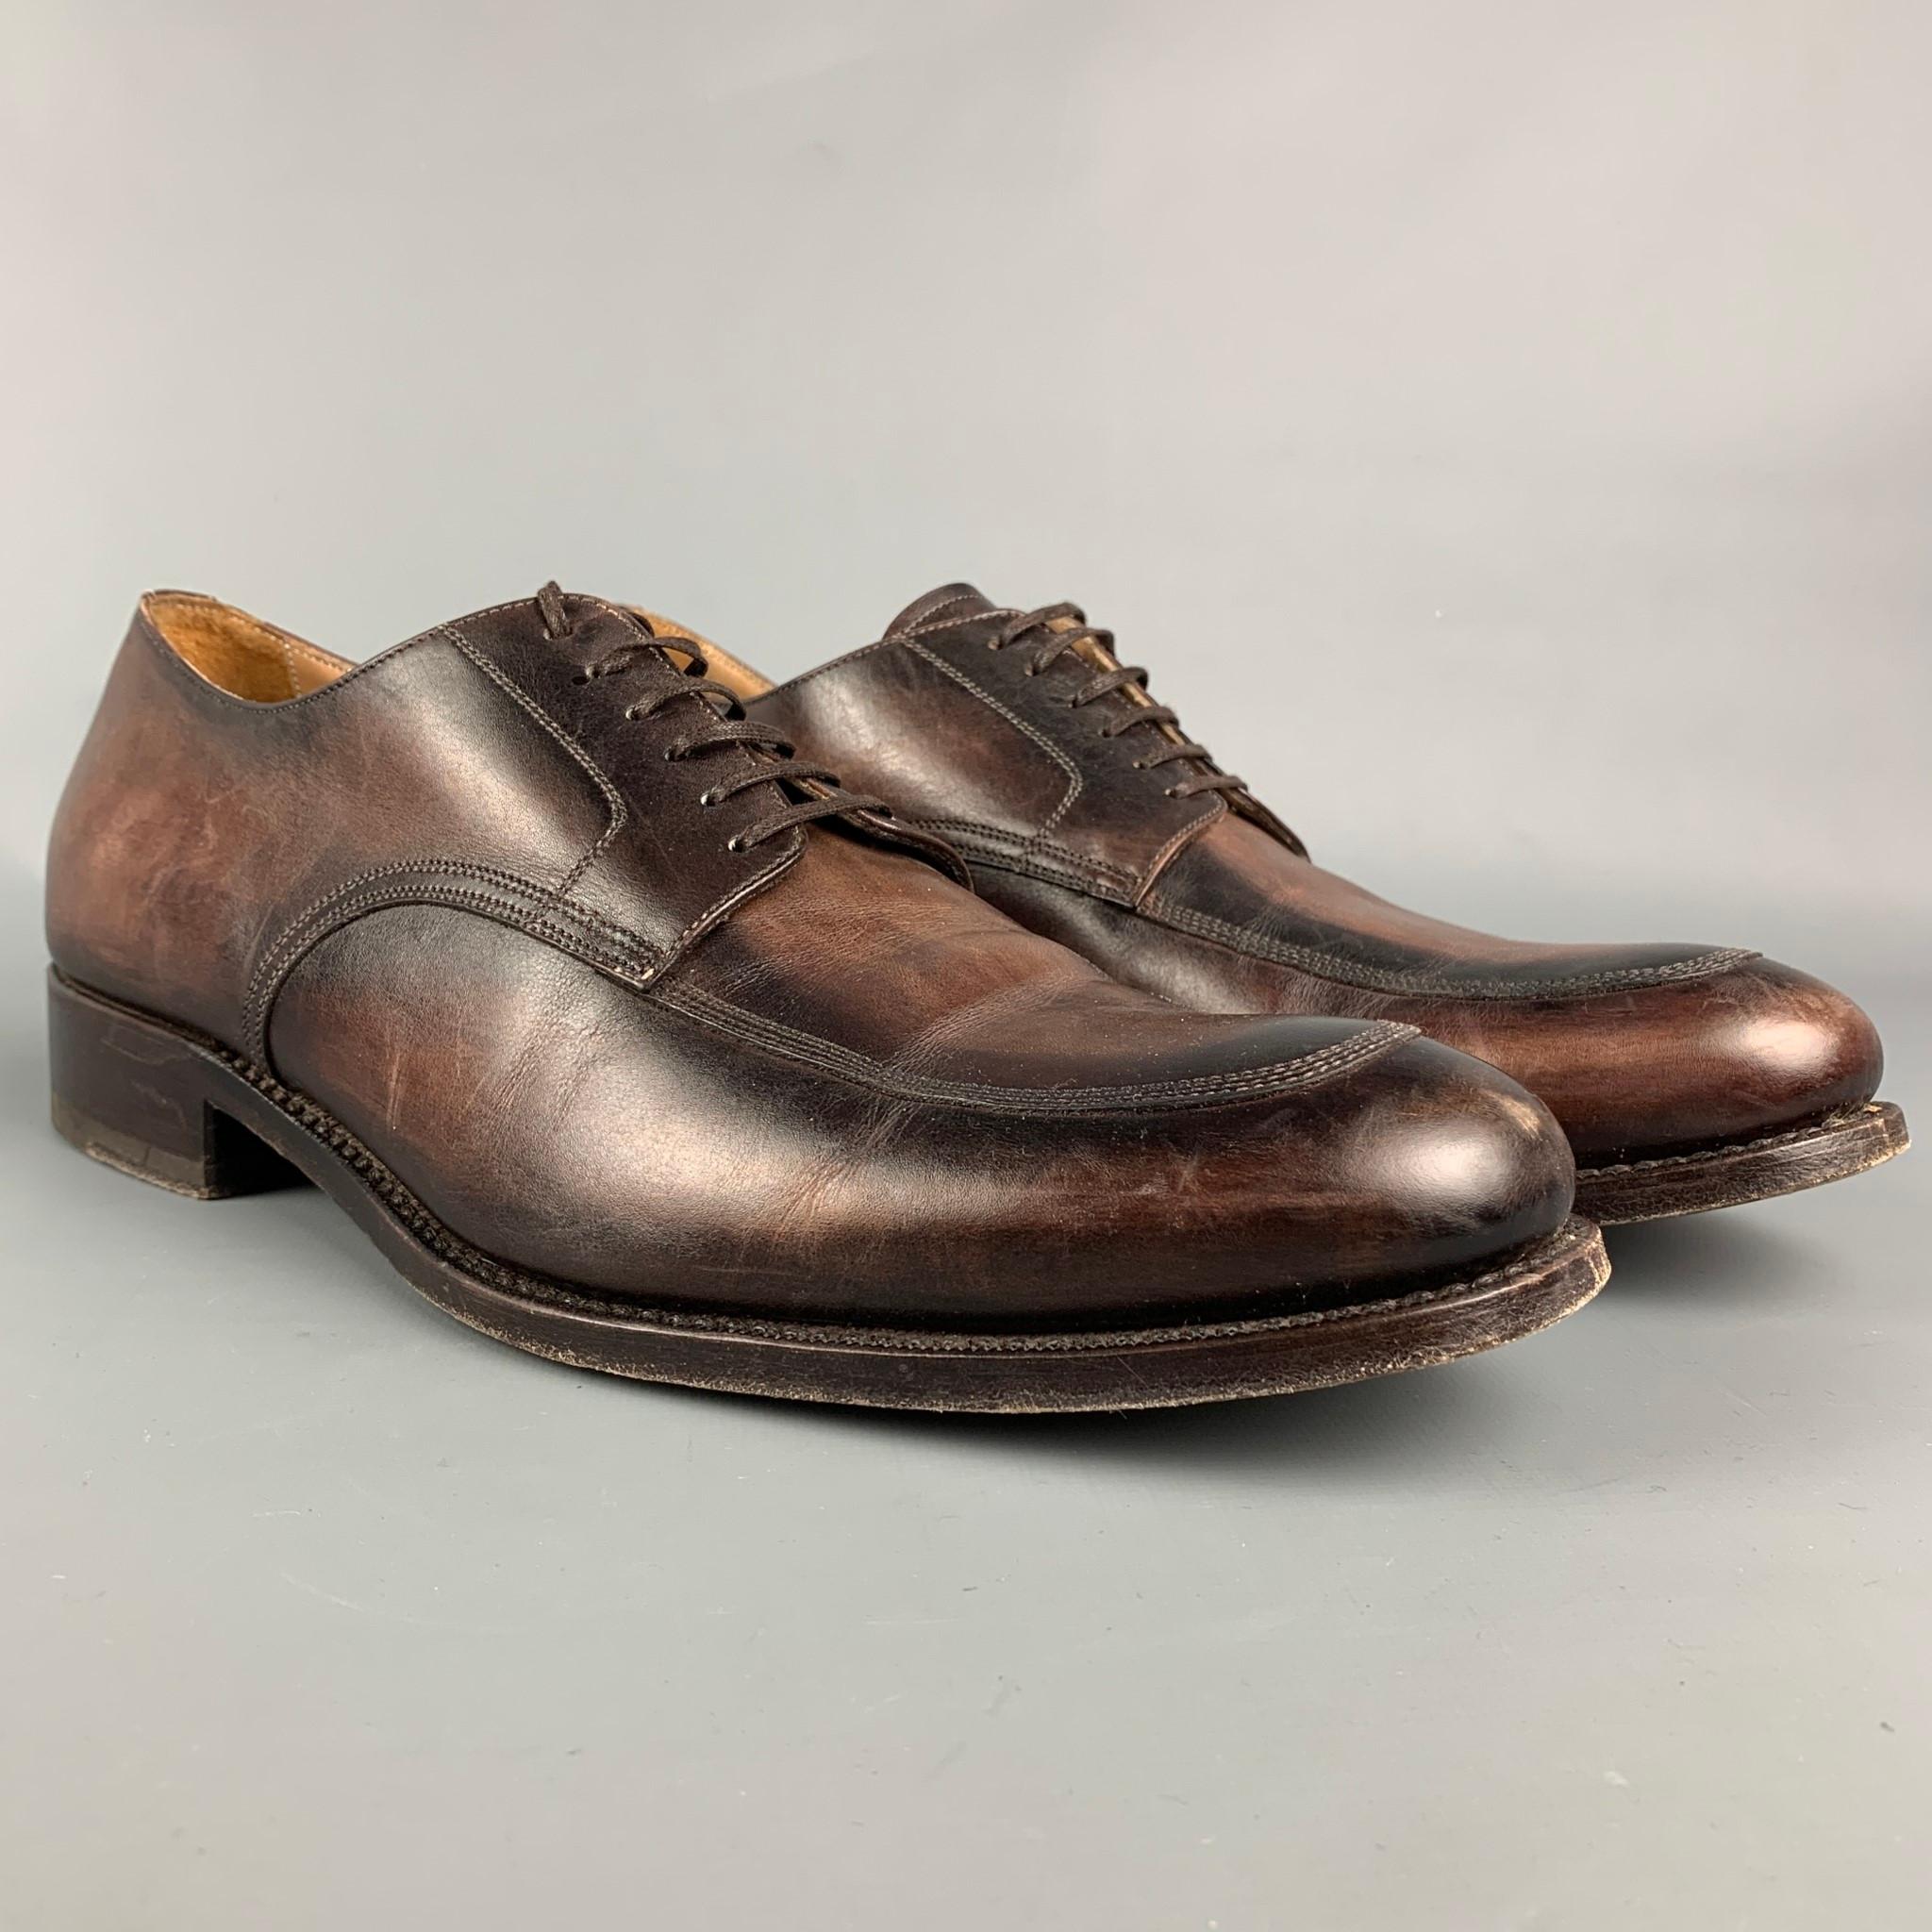 CALZOLERIA HARRIS for BARNEY'S NEW YORK shoes comes in a brown burnished leather featuring a oxford style, round toe, and a lace up closure. Made in Italy. 

Very Good Pre-Owned Condition.
Marked: 0473 10.5

Outsole: 12.5 in. x 4.25 in. 